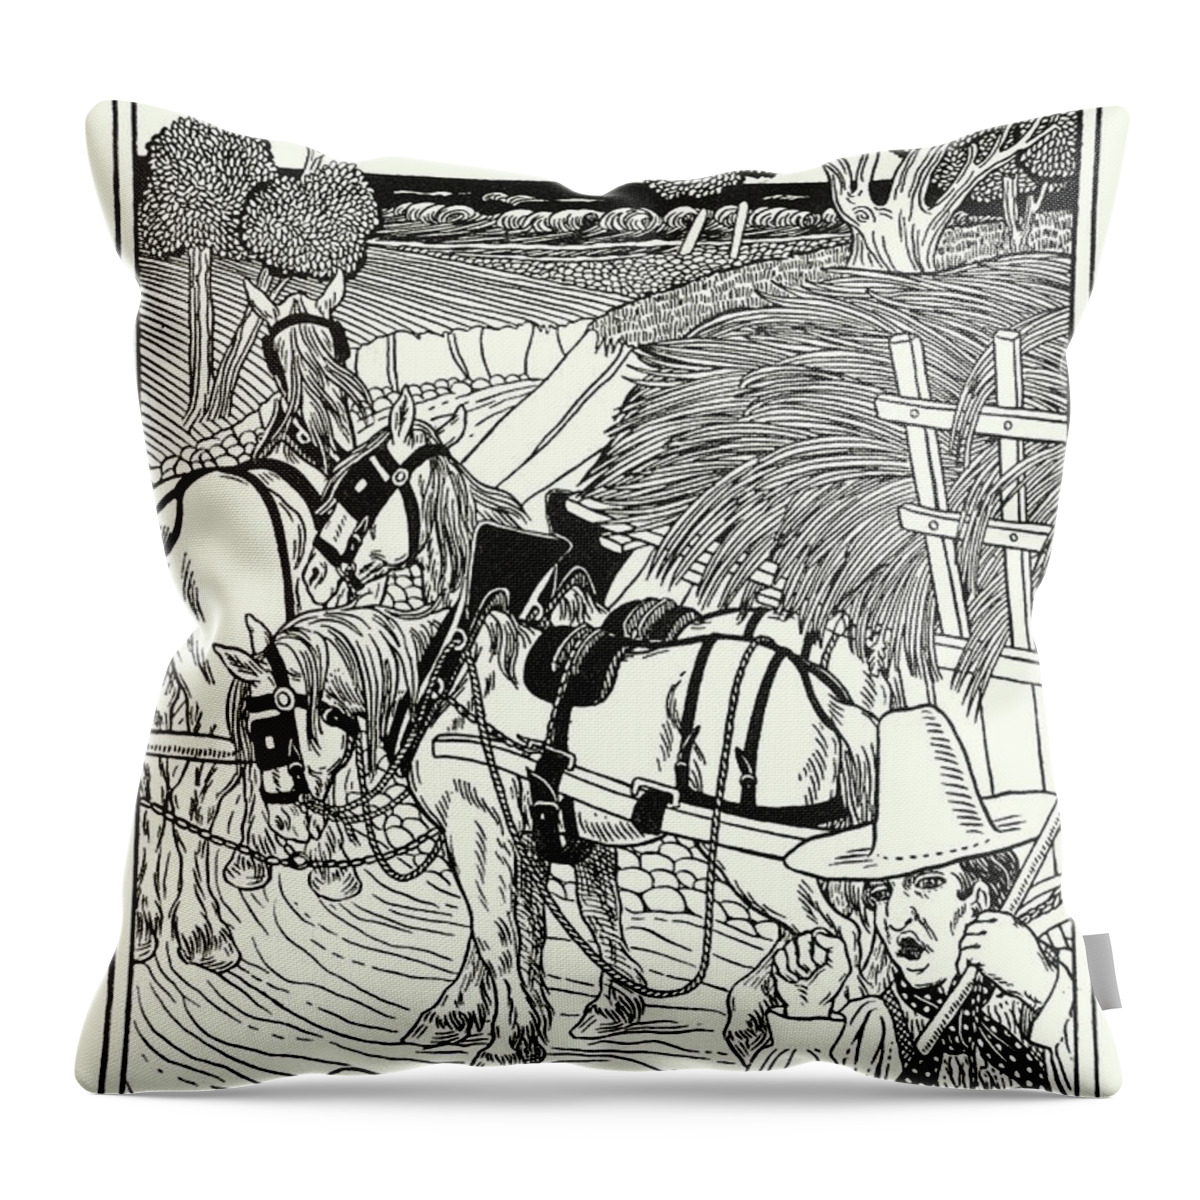 Border Throw Pillow featuring the painting Fables Of La Fontaine, The Carter In The Mire by Percy James Billinghurst